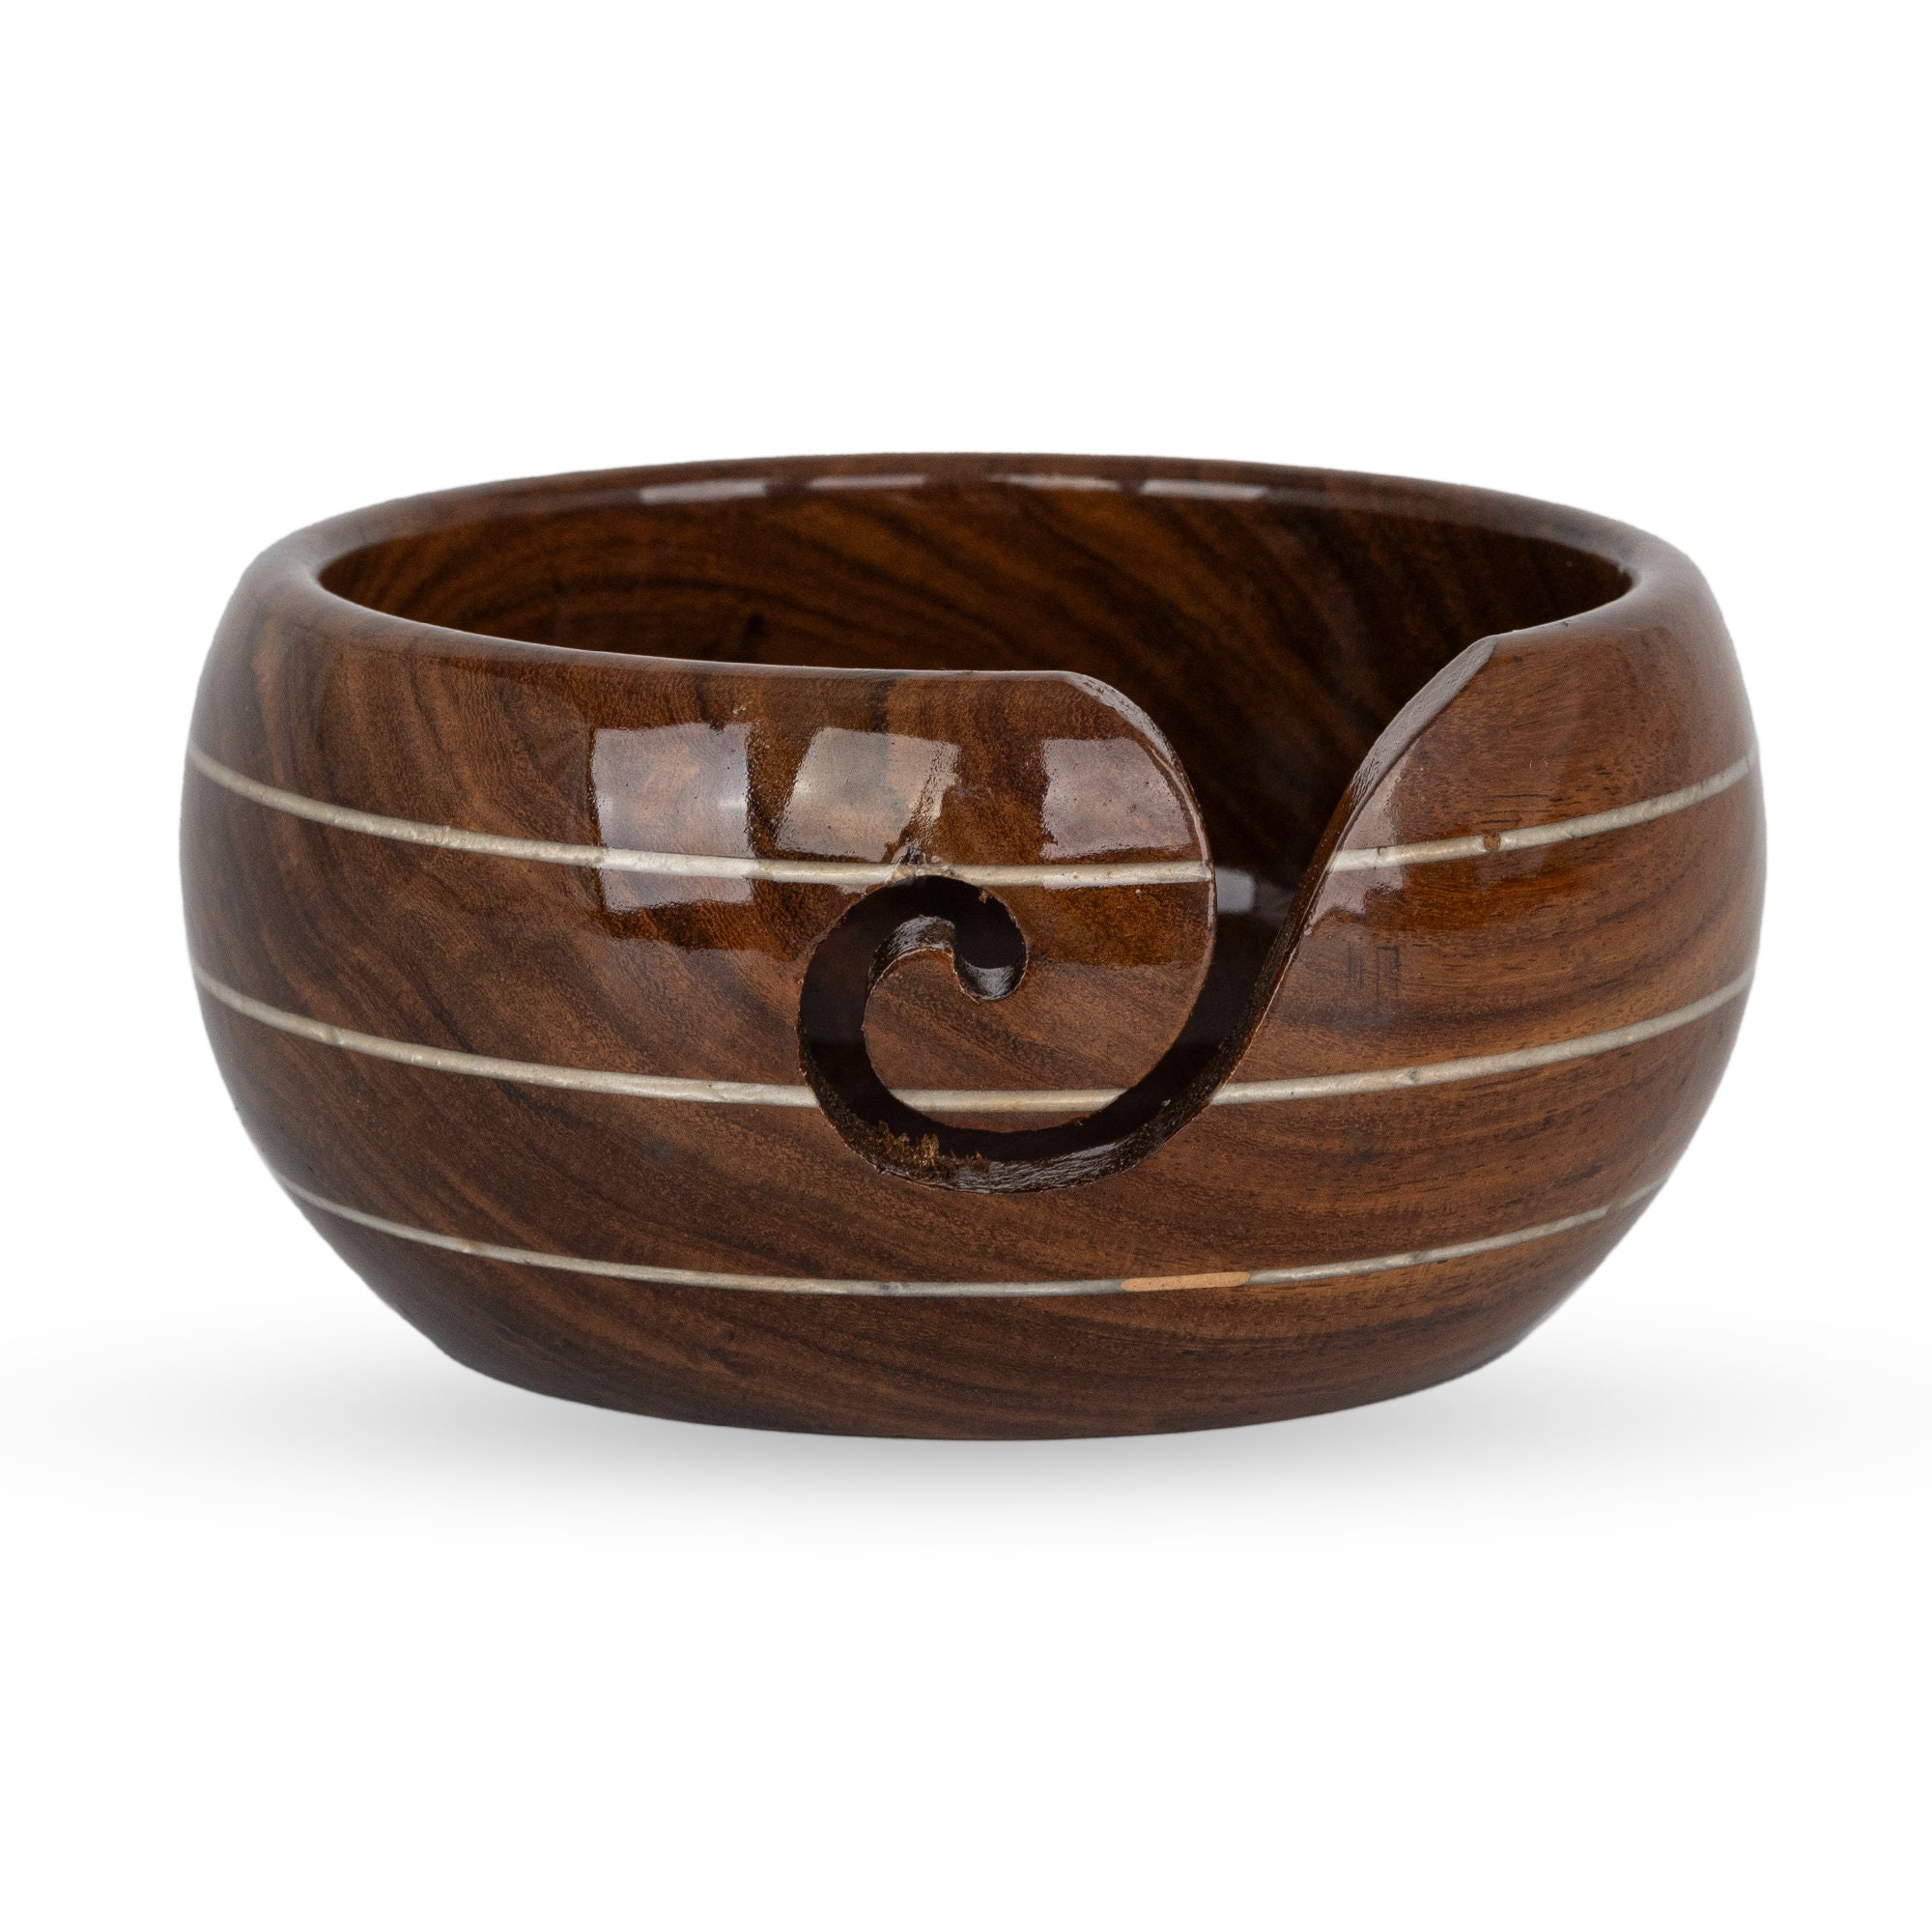 Buy Wooden Bowl Resin Online In India -  India